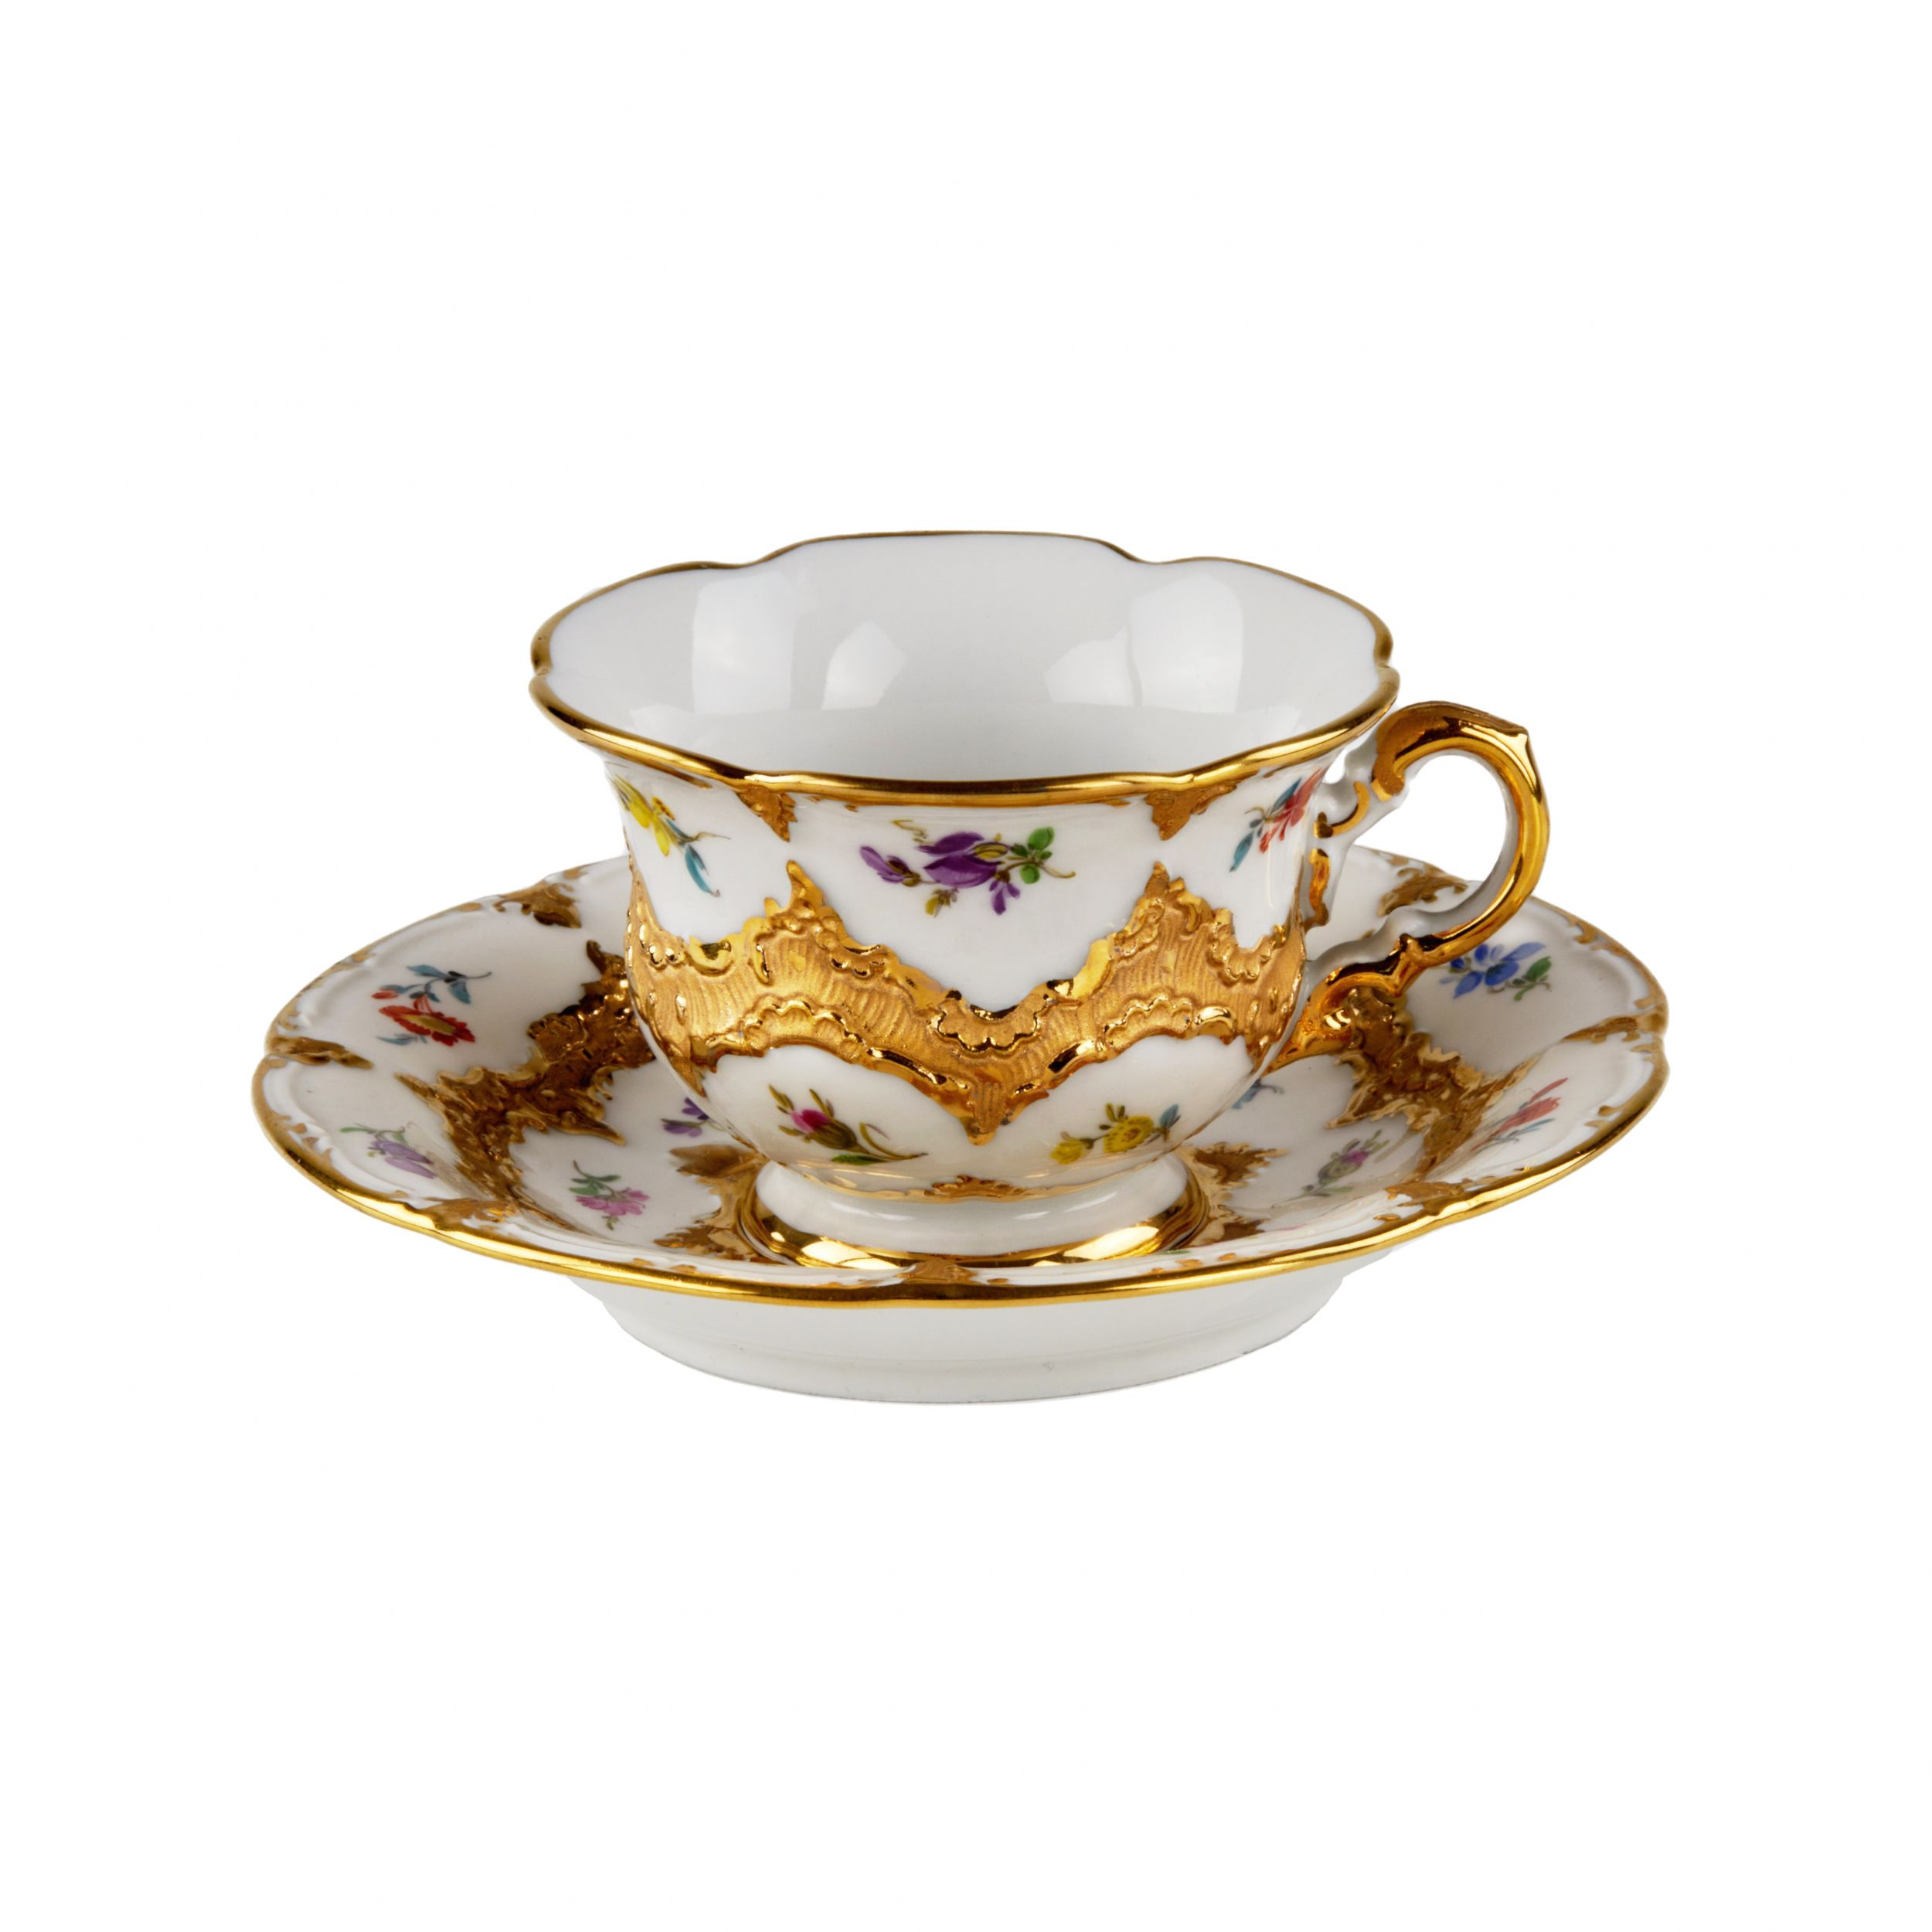 Meissen coffee service for 6 persons. - Image 3 of 9